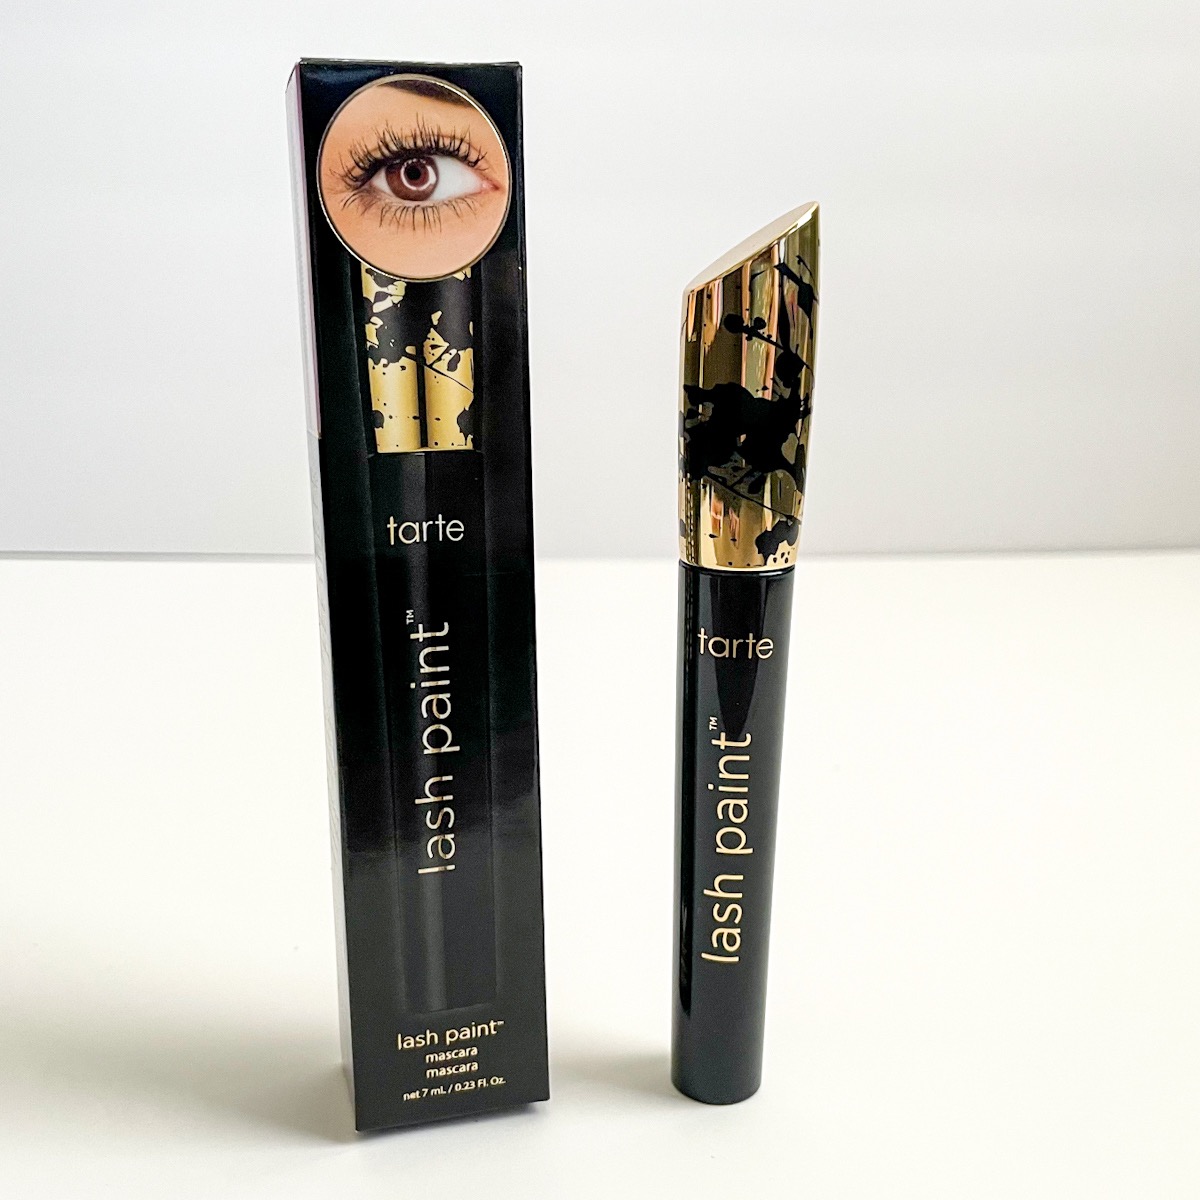 black and gold tube of mascara standing next to black and gold box